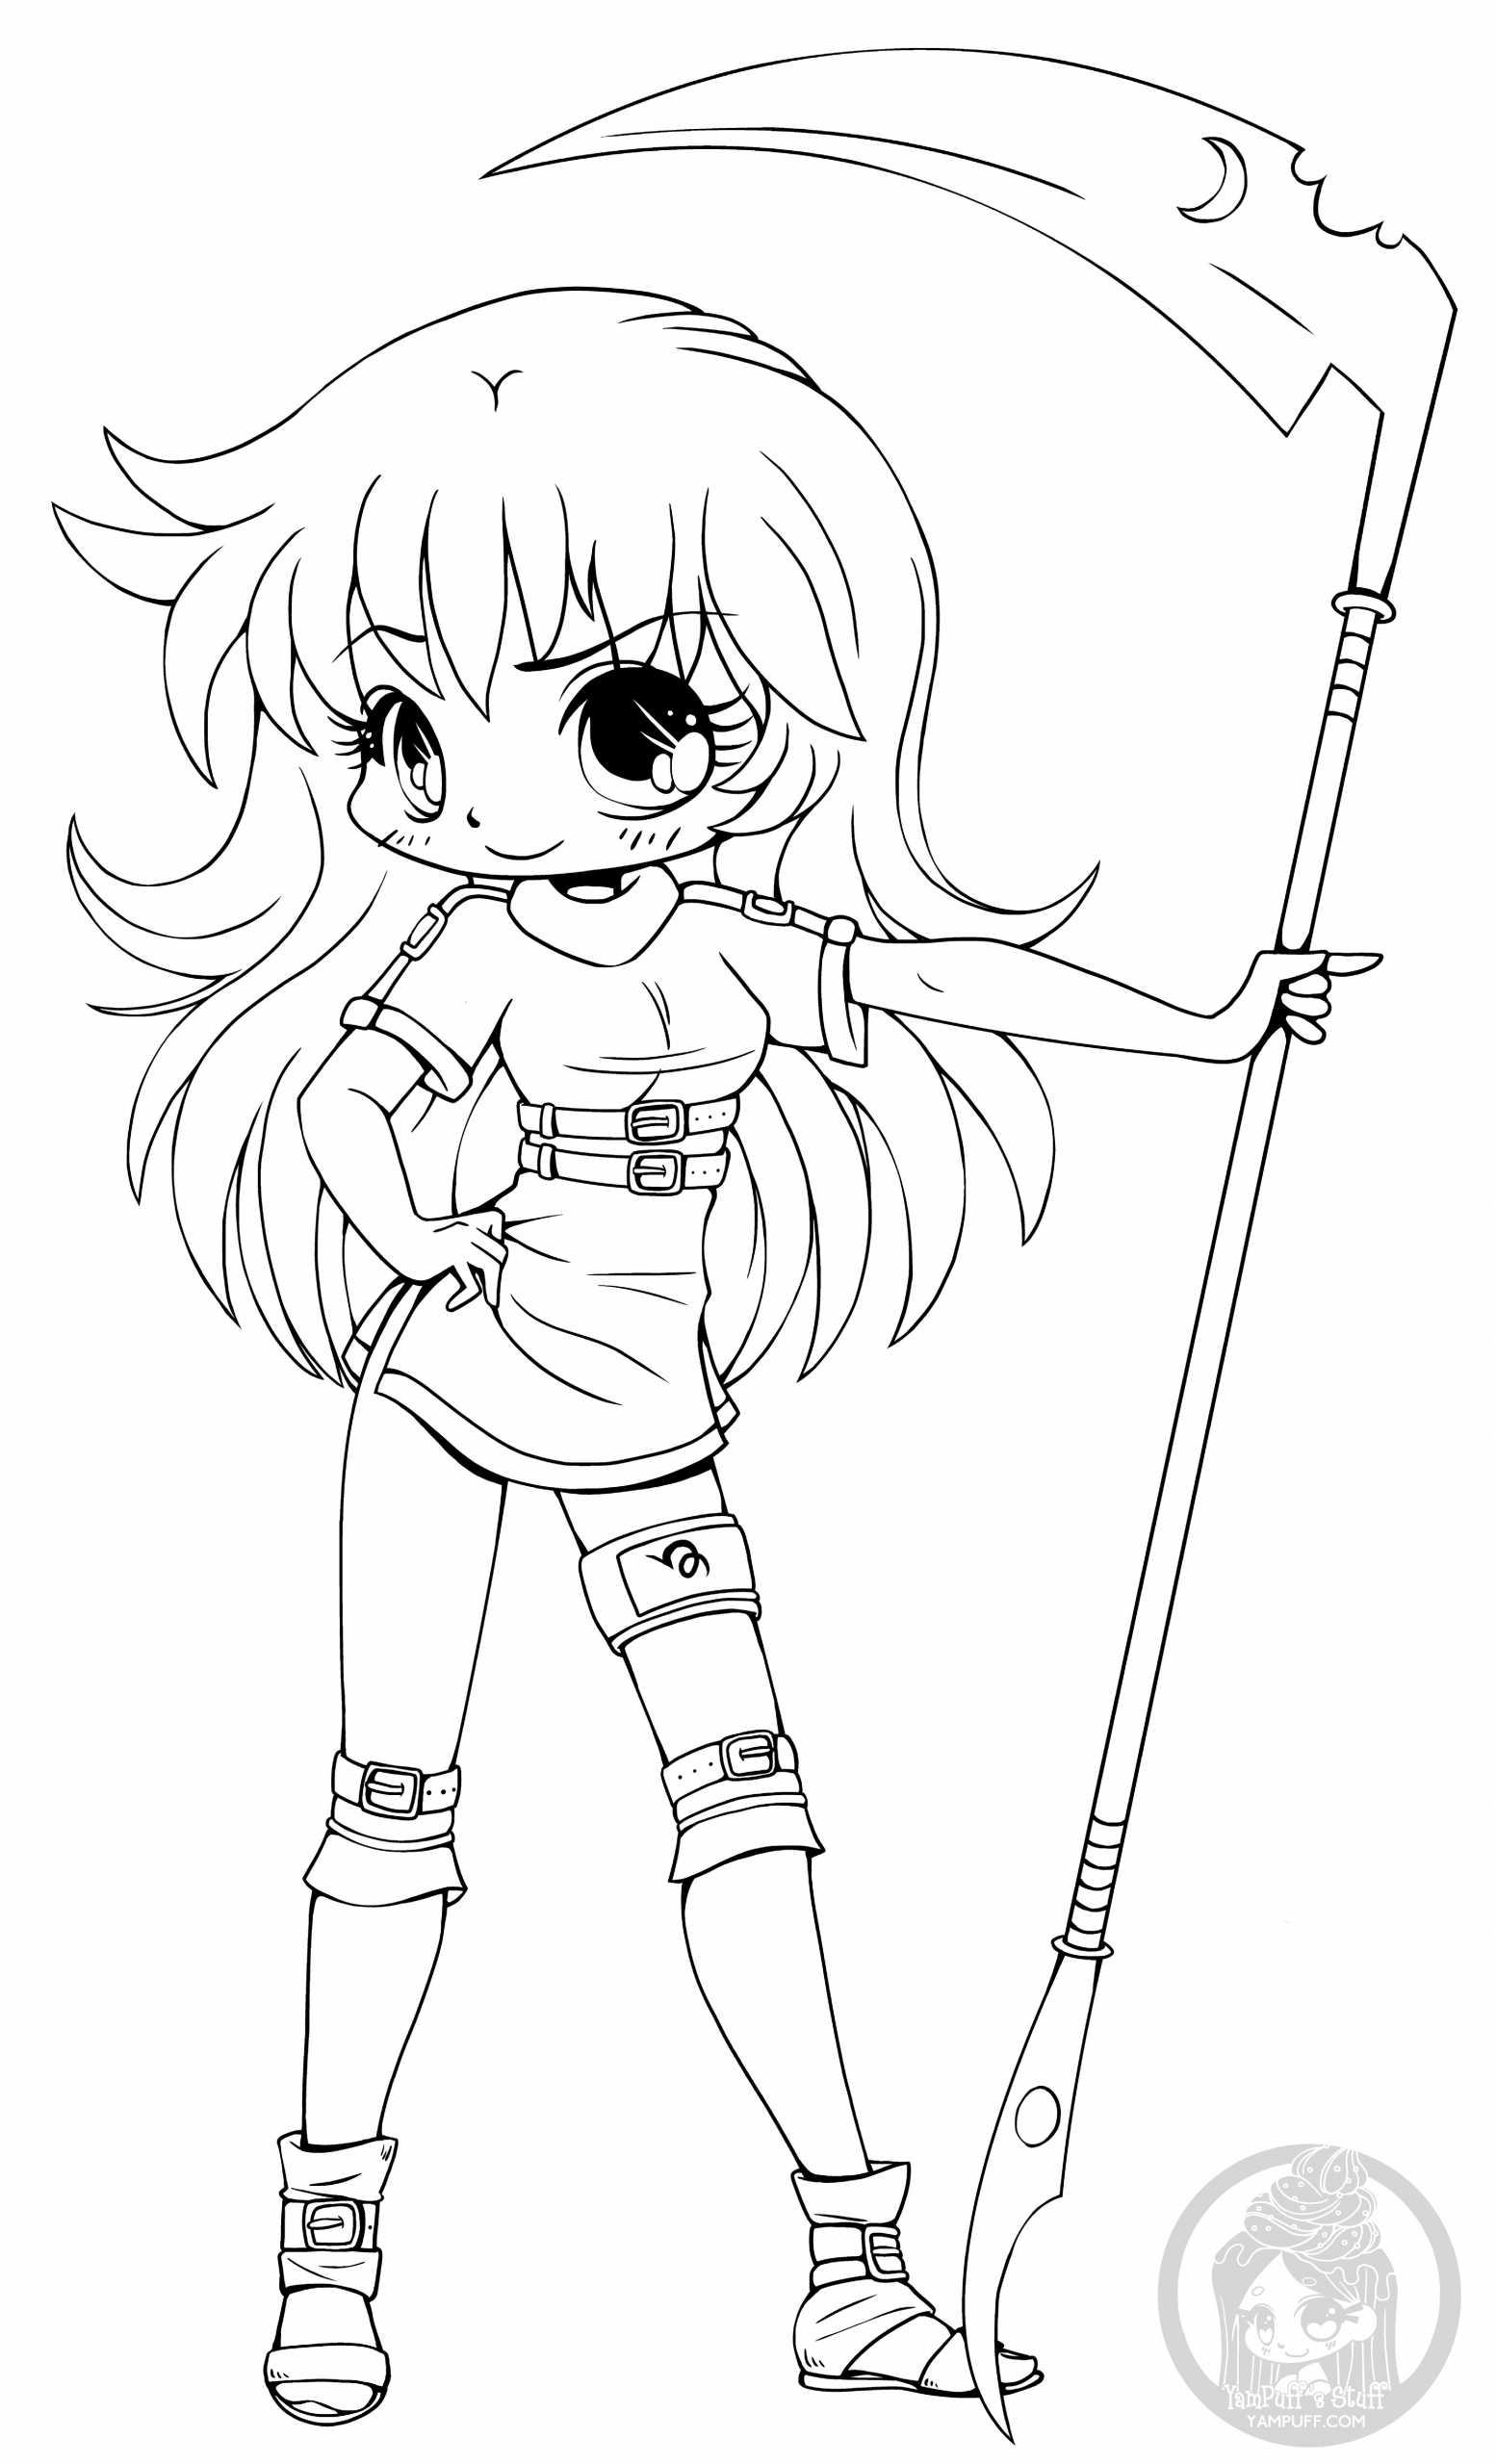 Anime Chibi Girl Coloring Pages For Girls Cat - anime girl